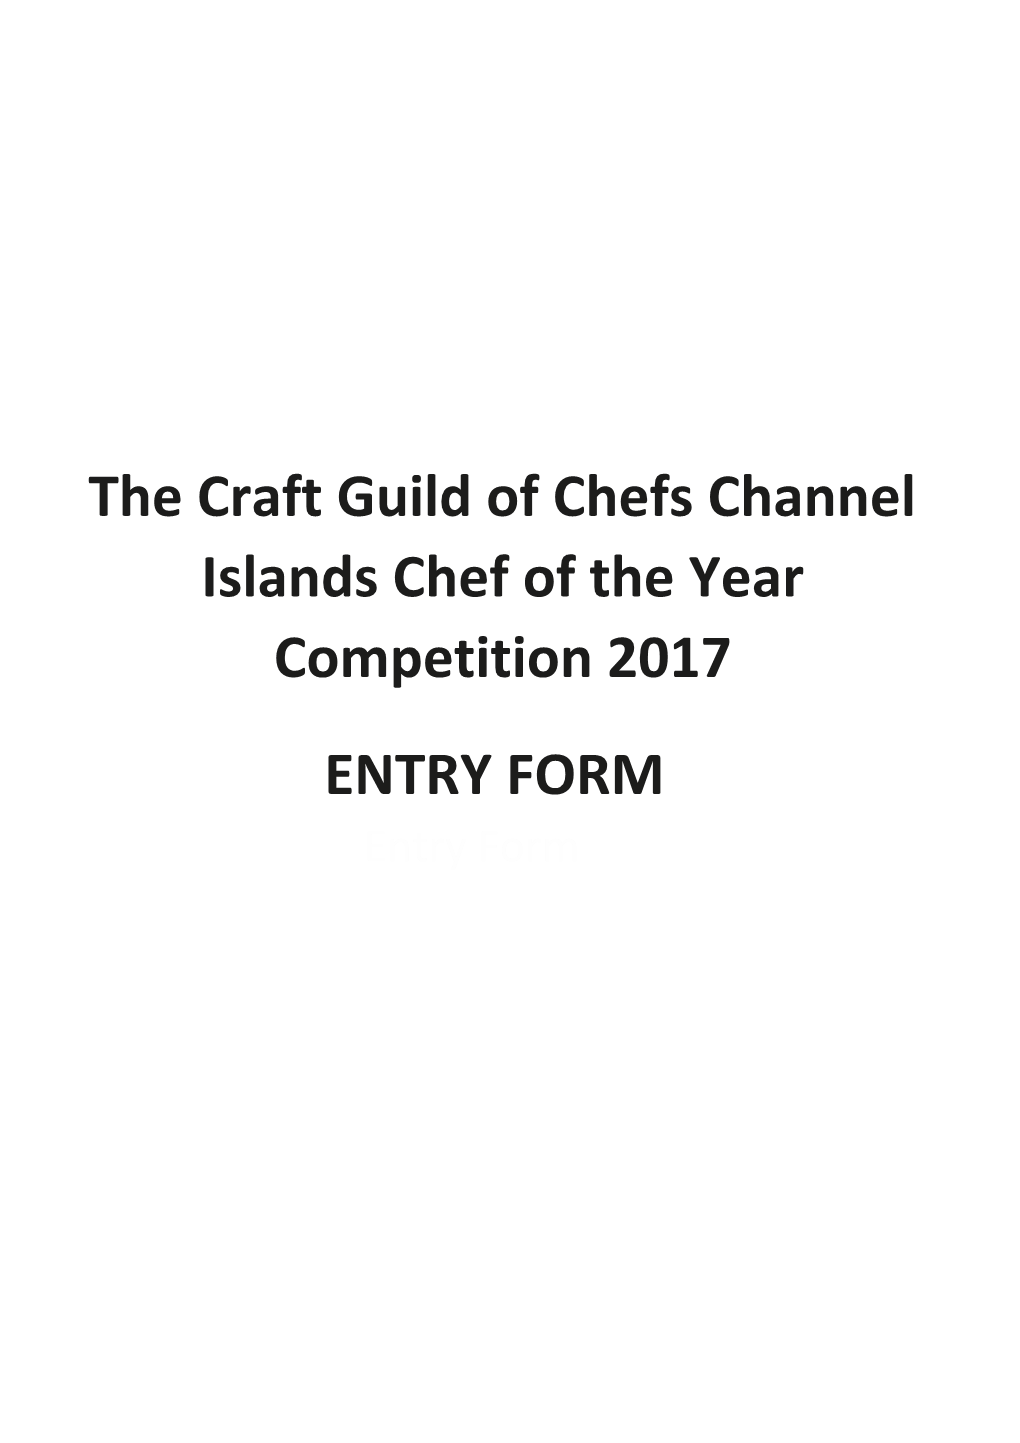 4 CHANNEL ISLAND CHEF of the YEAR 2015.Pages